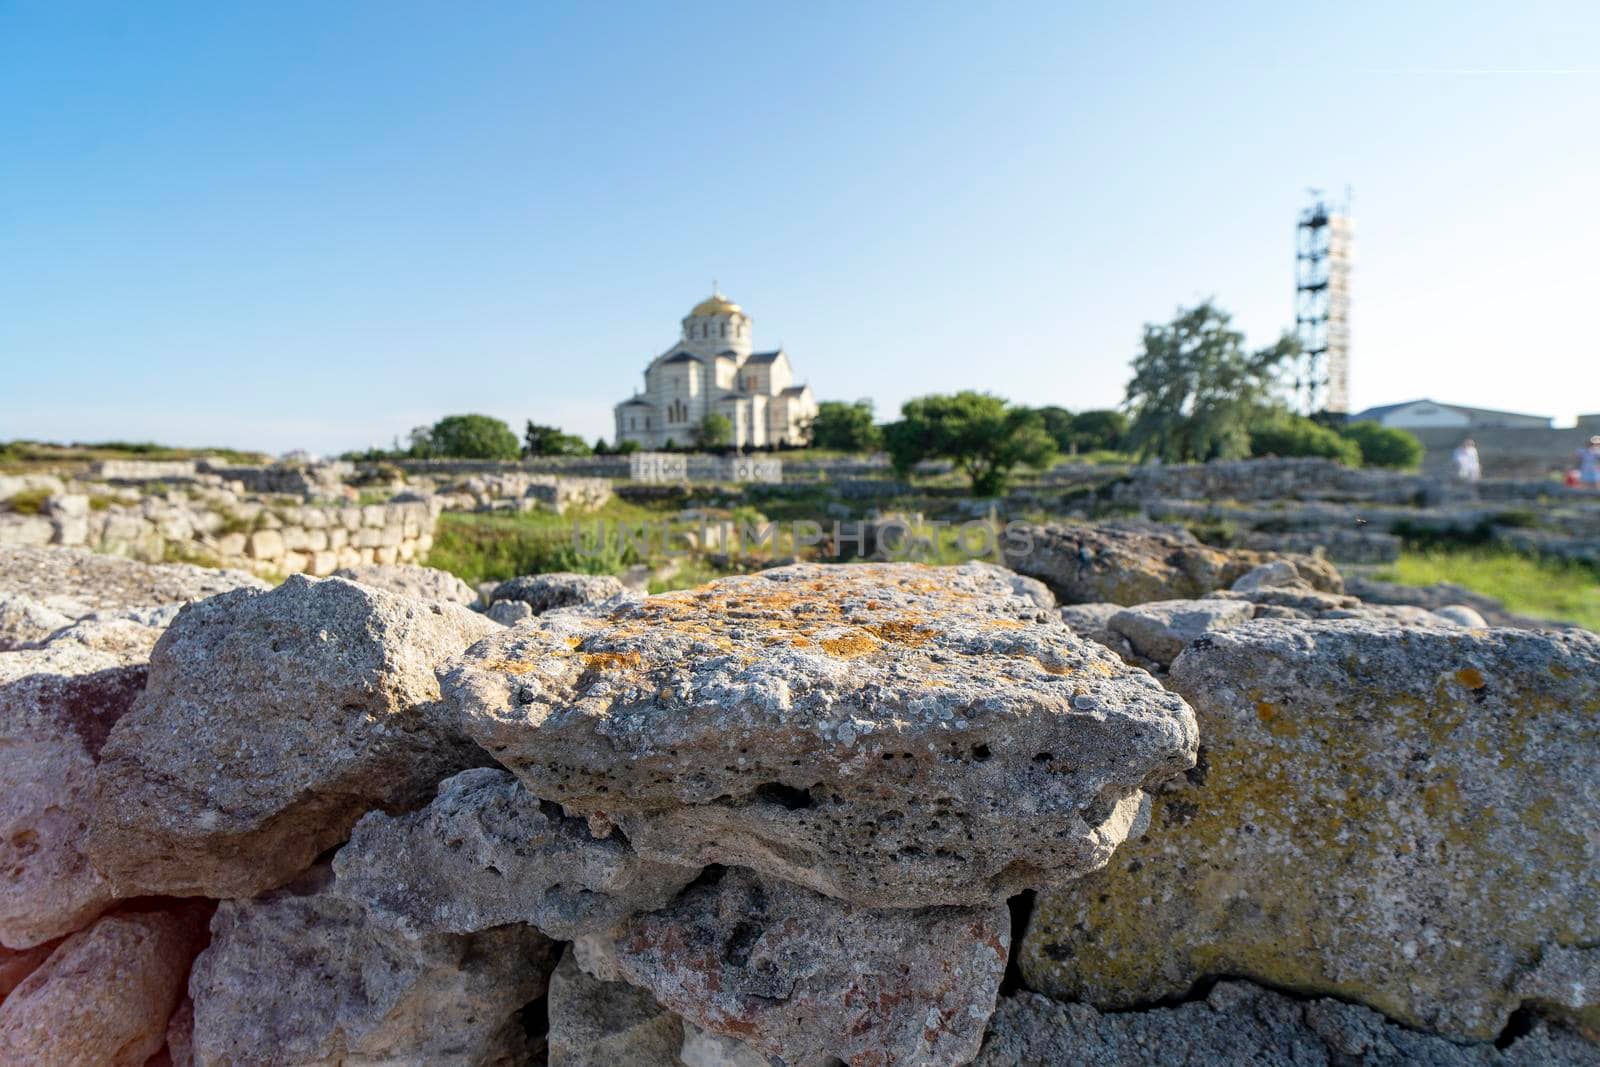 Landscape with a view of the ancient Chersonese in Sevastopol.